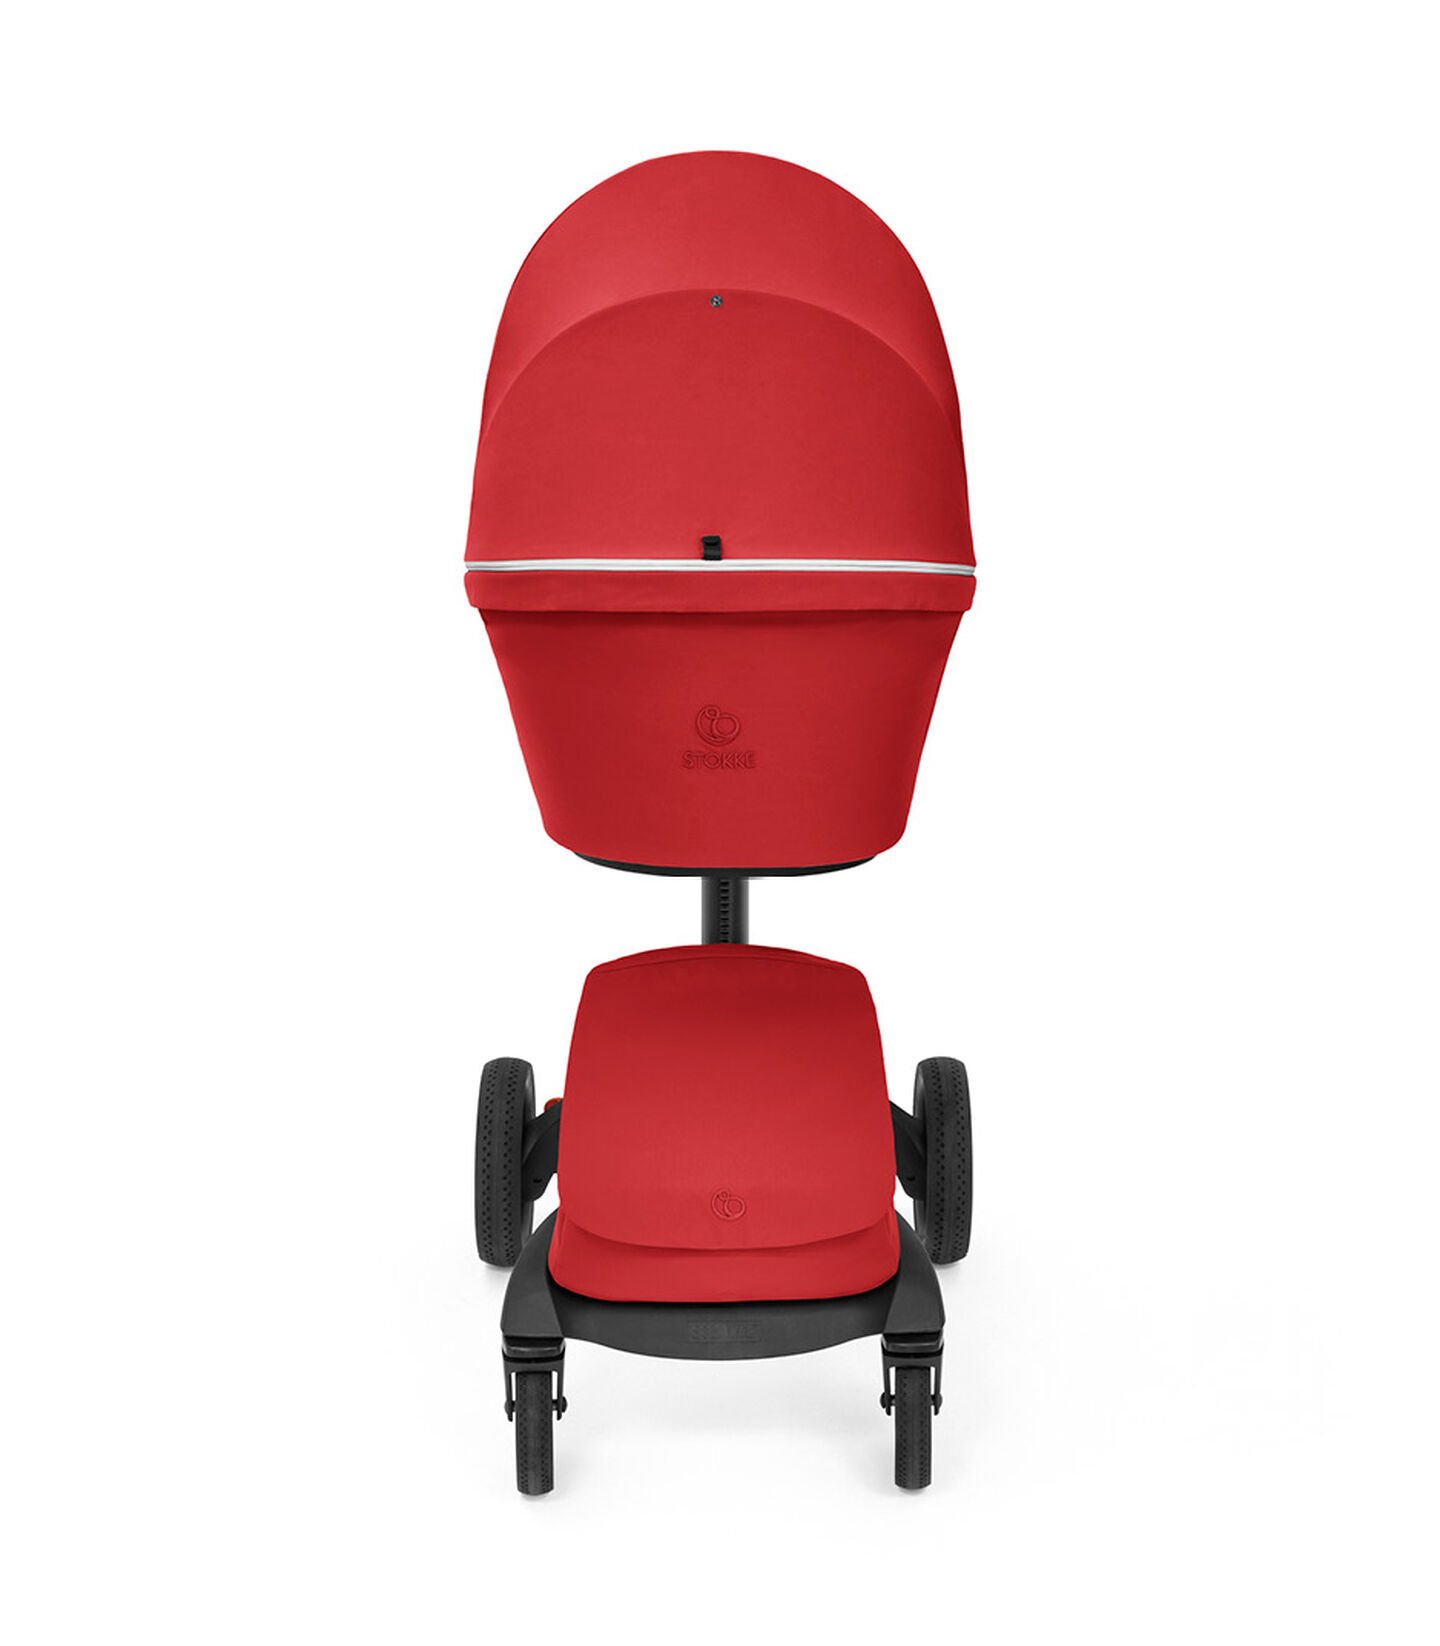 Stokke® Xplory® X reiswieg Ruby Red, Ruby Red, mainview view 4